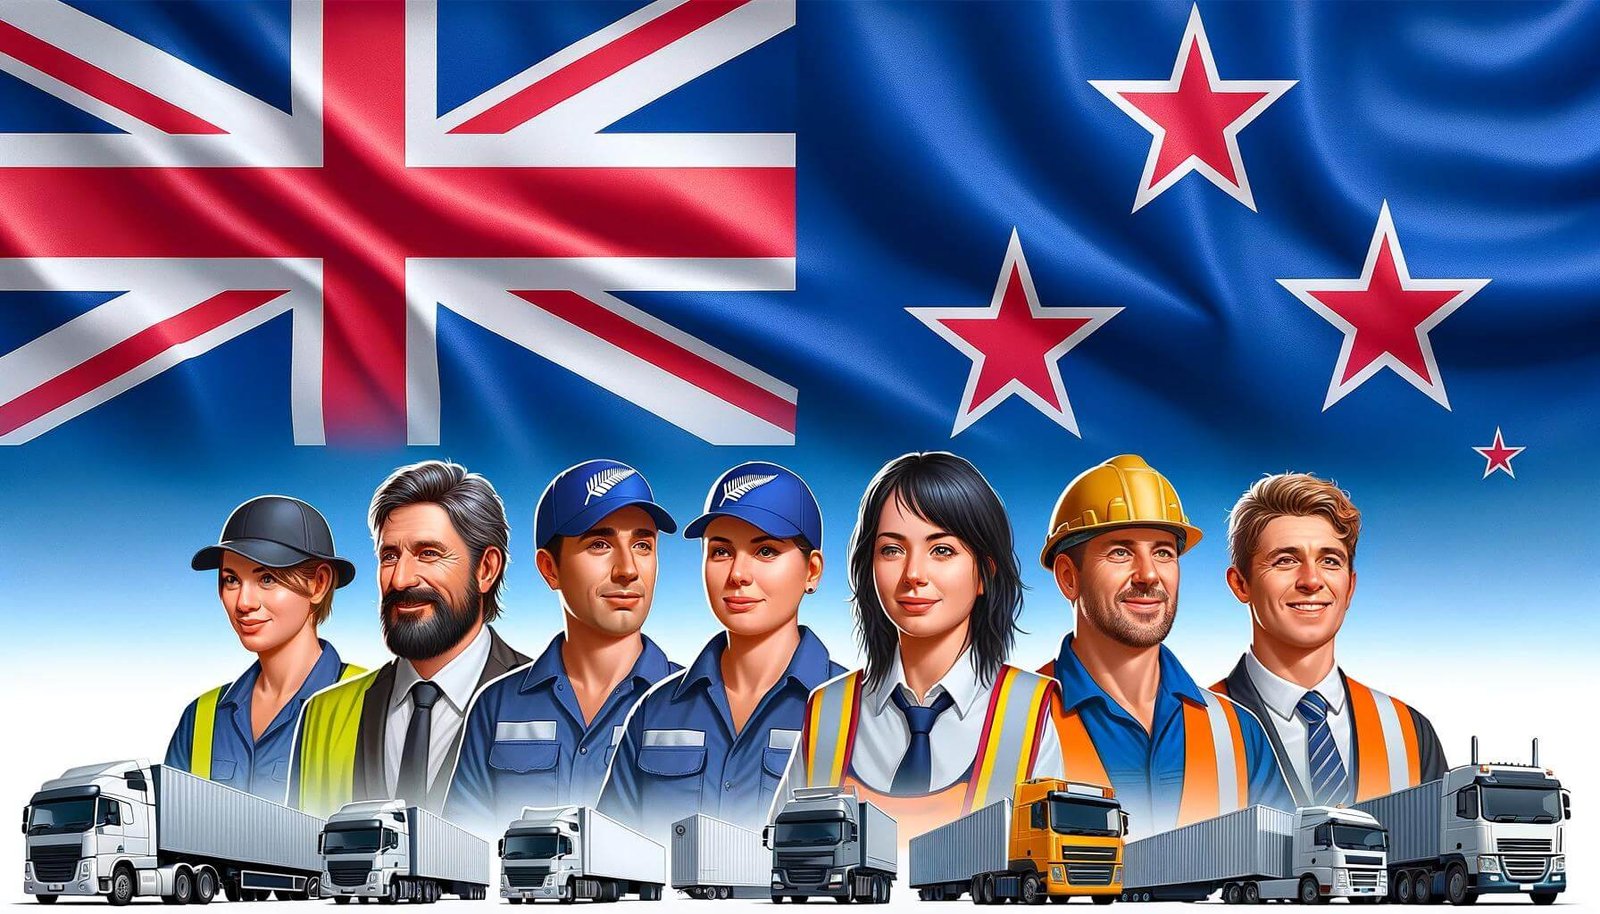 Transport & Logistics industry in New Zealand – Courses, Careers, and Settlement